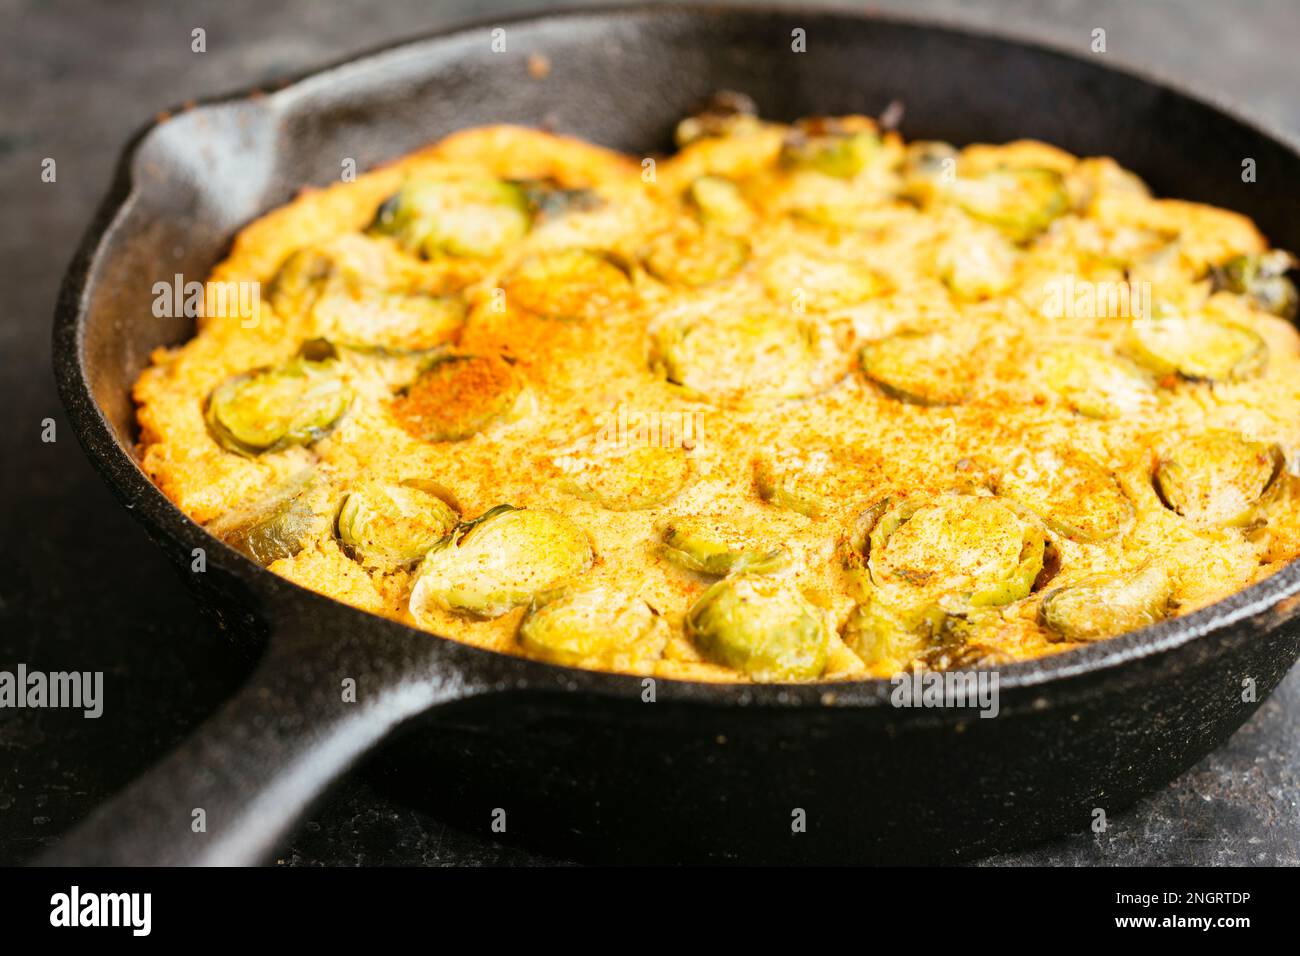 Home made vegan Brussels sprouts frittata using chickpea flour. Stock Photo